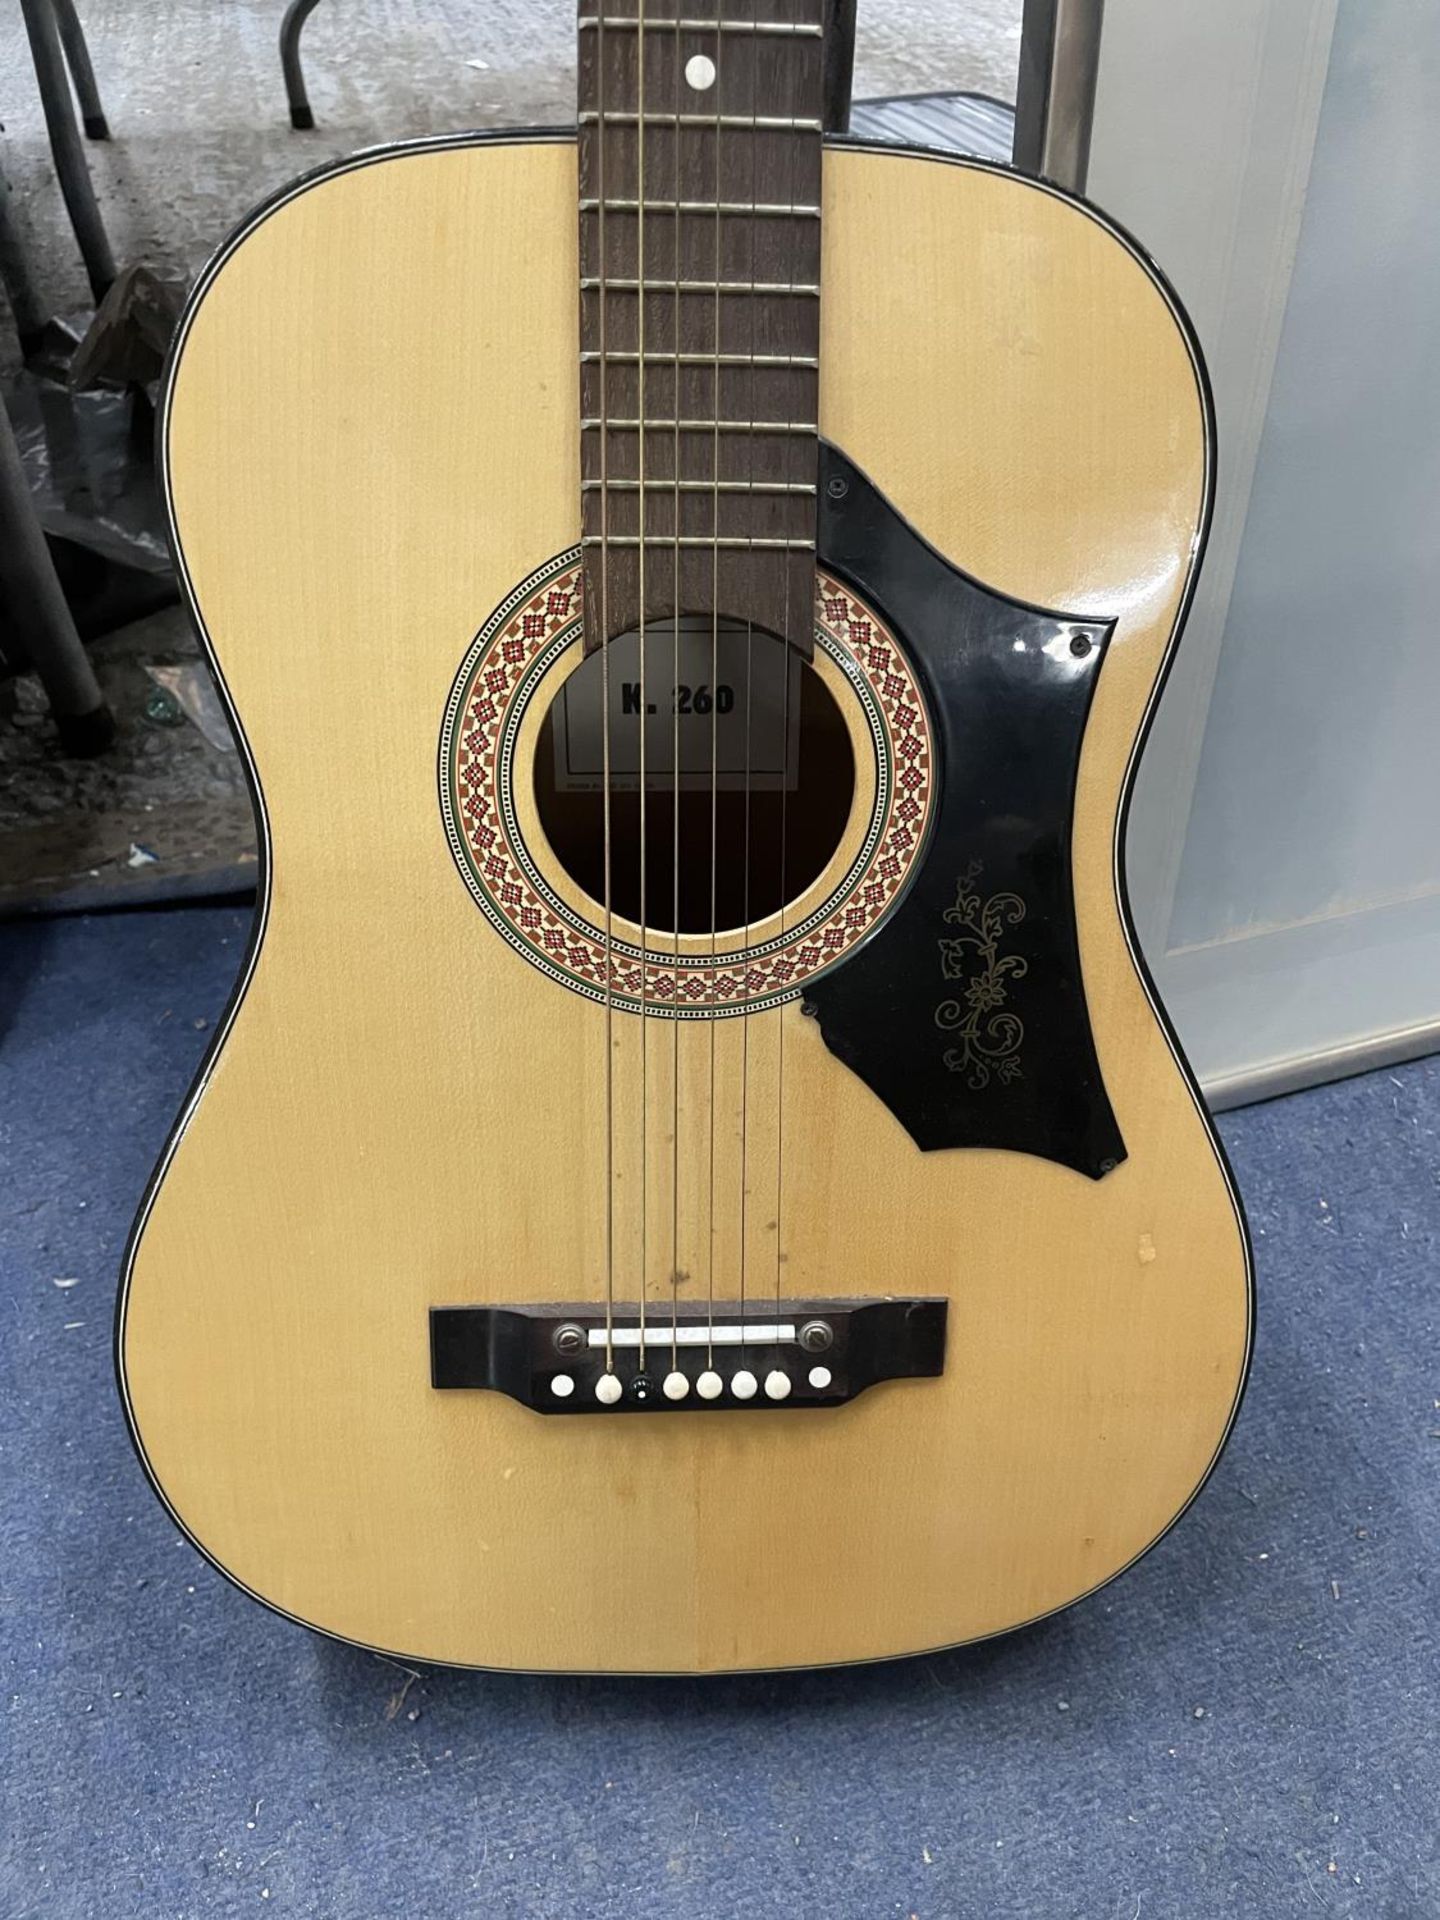 AN ACOUSTIC GUITAR - Image 2 of 3